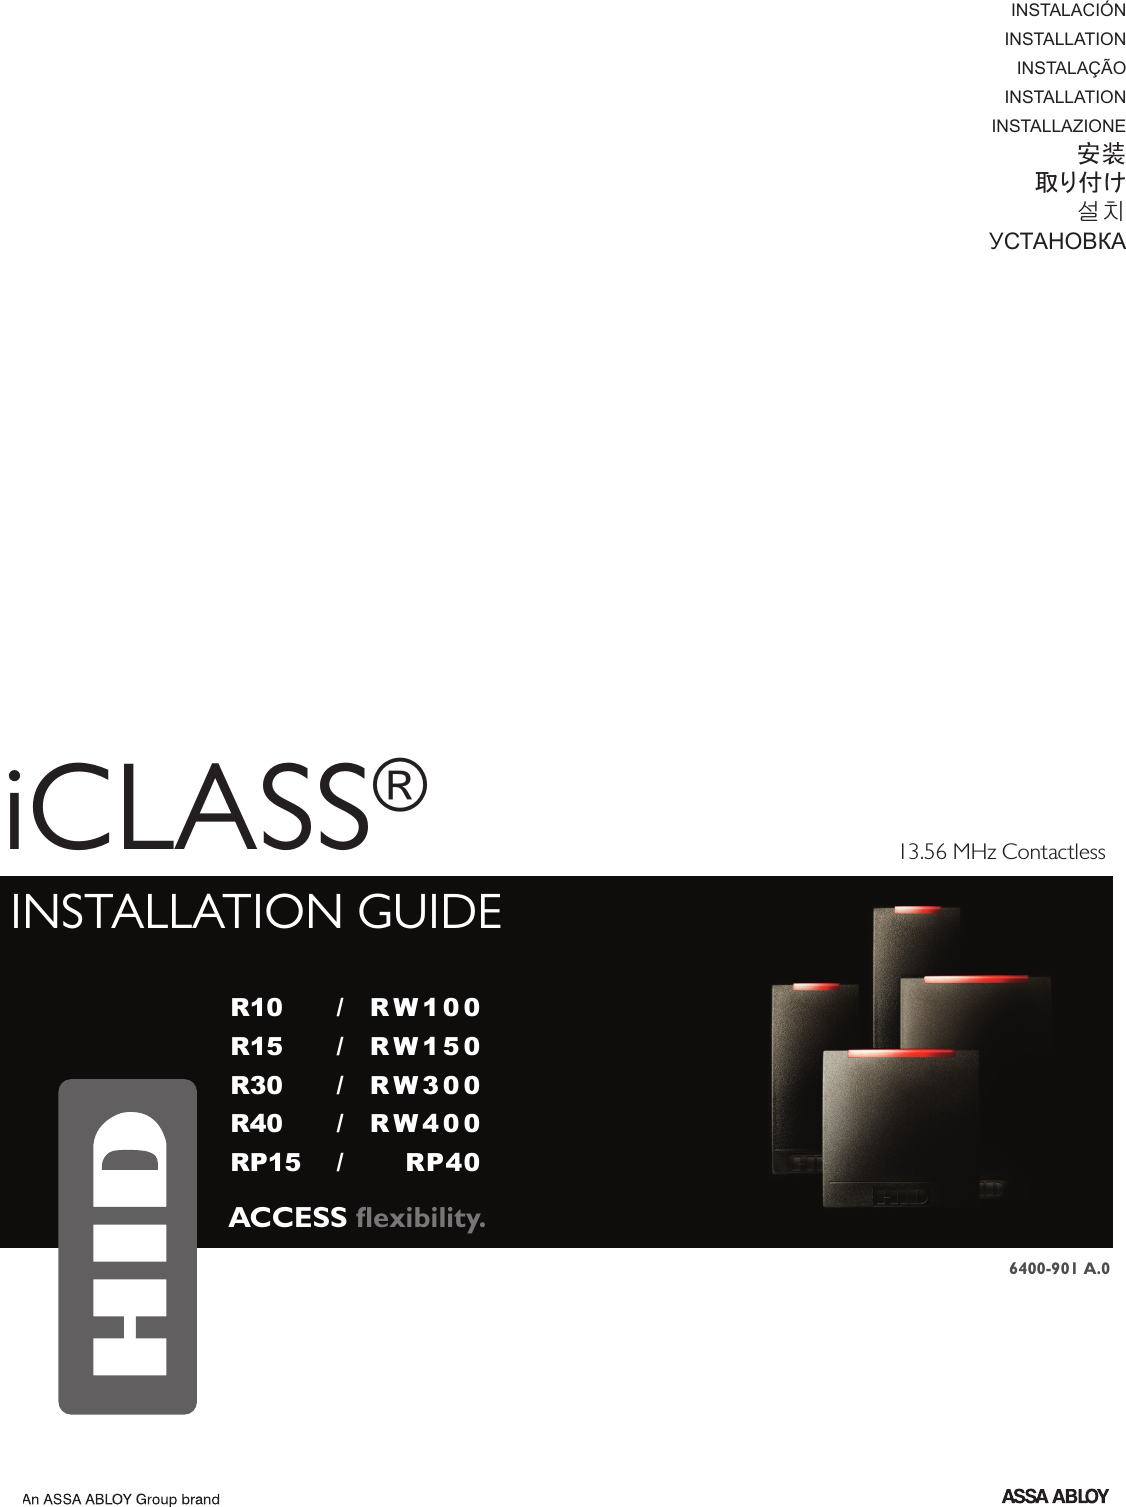 iCLASS®INSTALLATION GUIDEi n s t a l a c i ó ni n s t a l l a t i o ni n s t a l a ç ã oi n s t a l l a t i o ni n s t a l l a z i o n e安装取り付け설치R10  /  R W 1 0 0R15  /  R W 1 5 0R30  /  R W 3 0 0R40  /  R W 4 0 0RP15  /  RP40ACCESS ﬂexibility.13.56 MHz Contactless6400-901 A.0